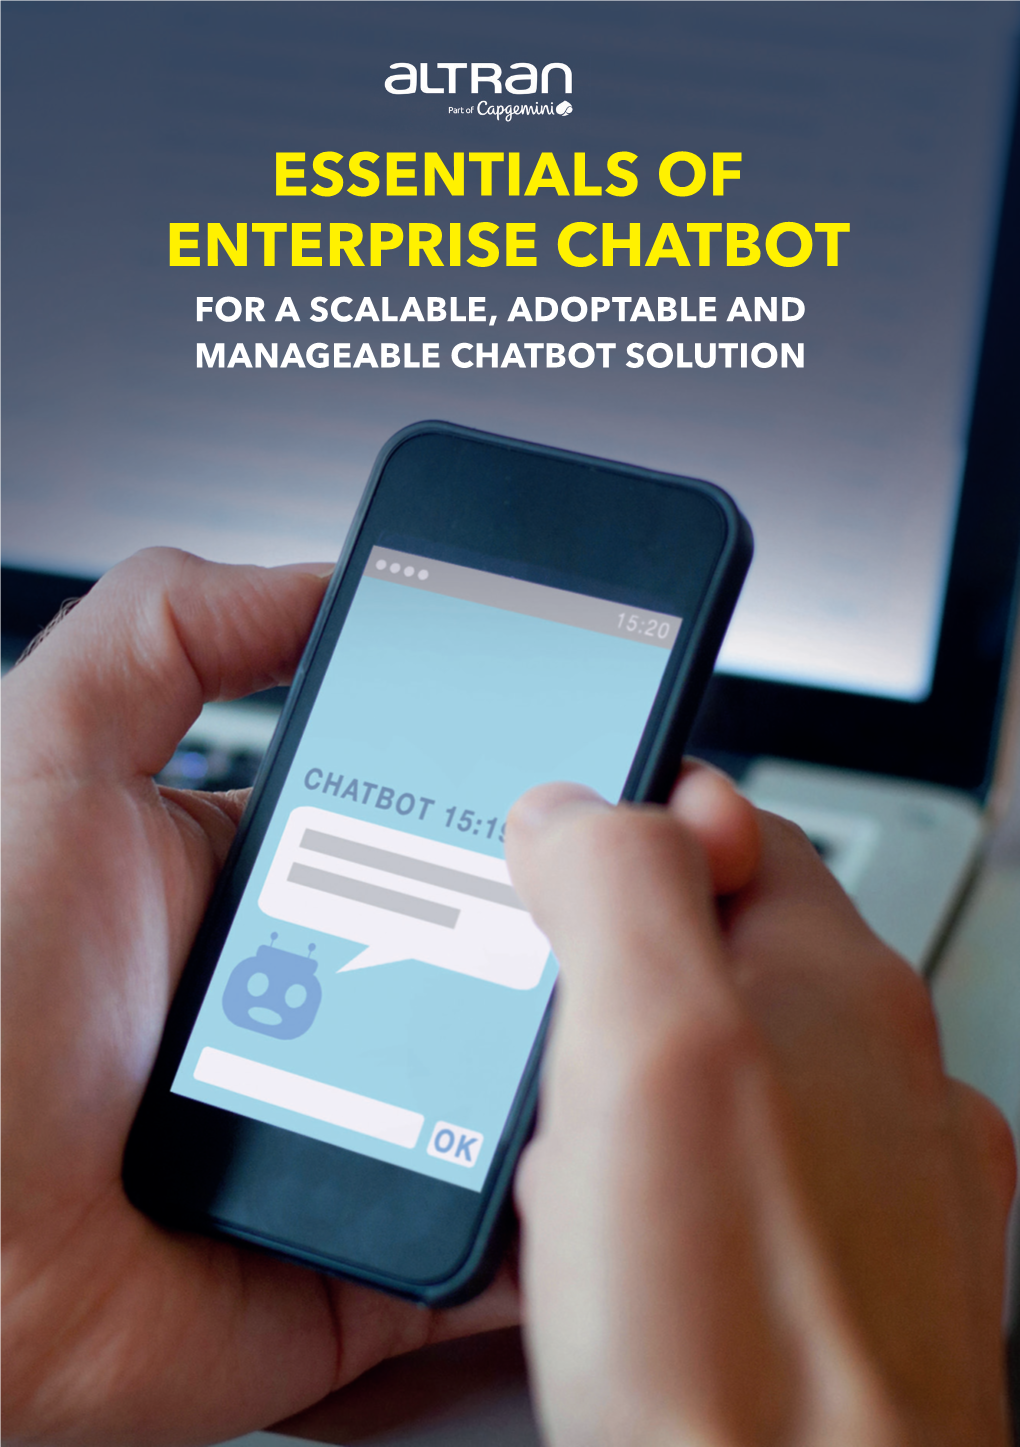 Essentials of Enterprise Chatbot for a Scalable, Adoptable and Manageable Chatbot Solution Table of Contents